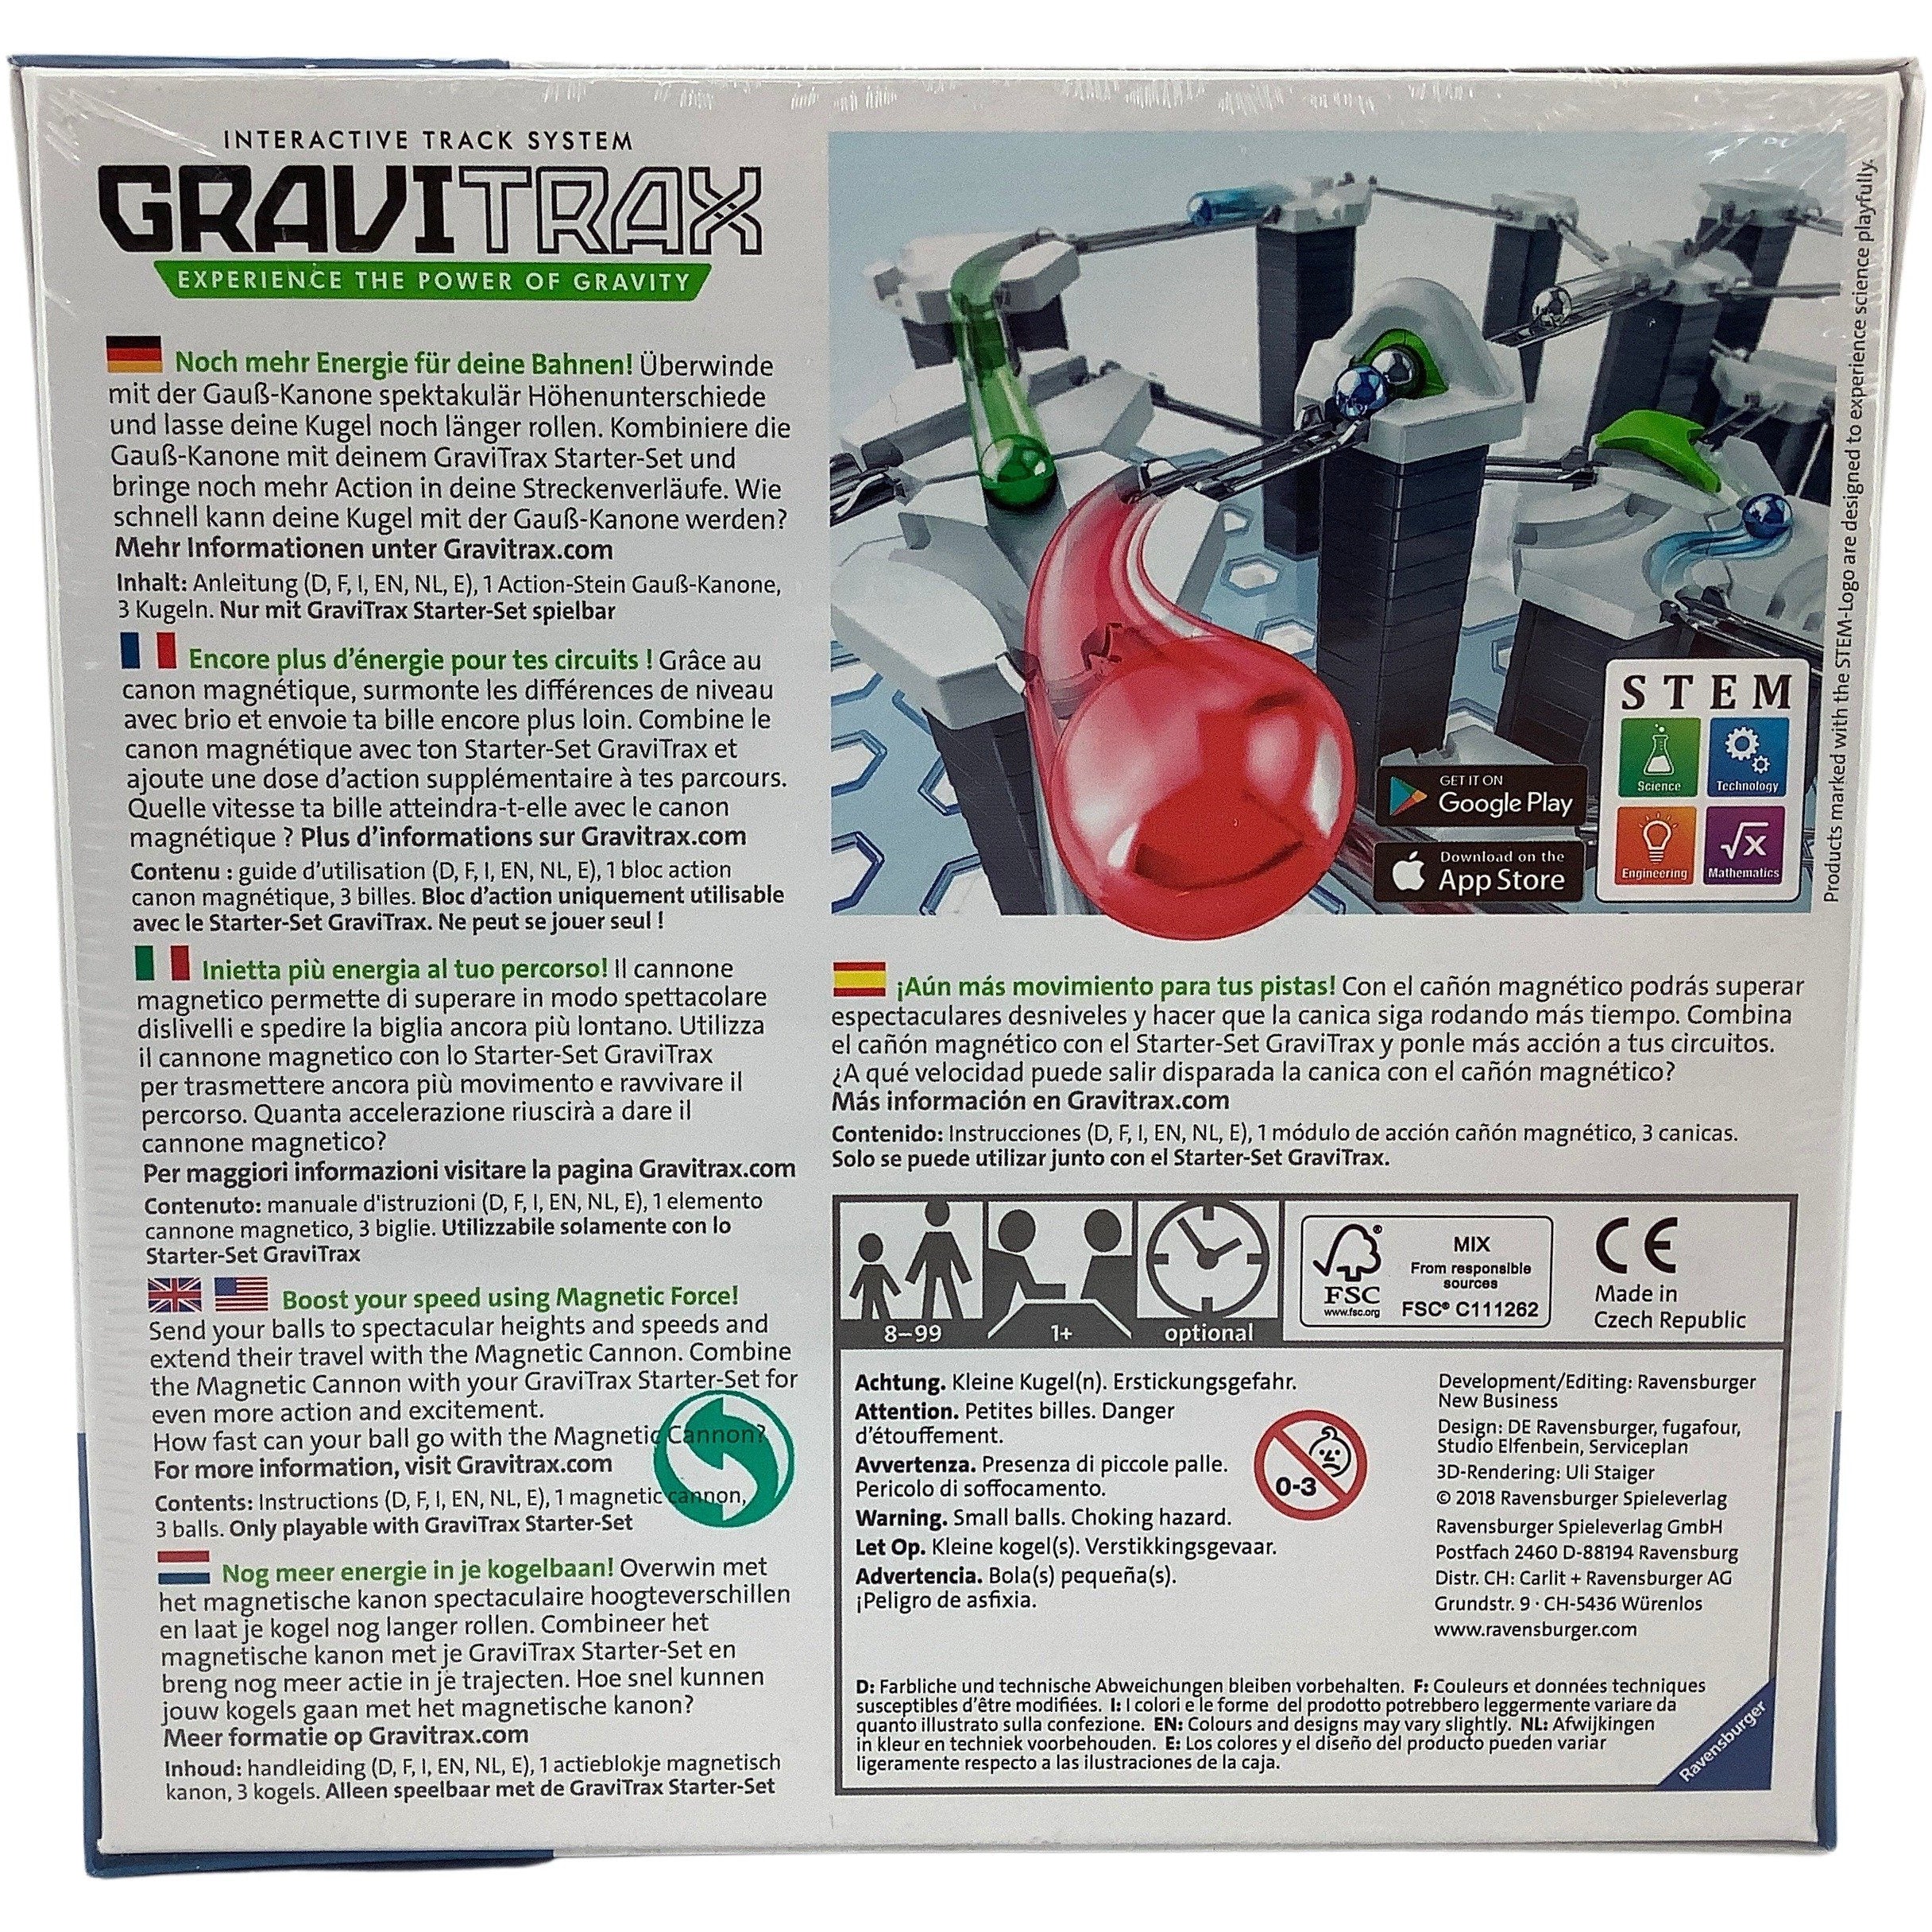 Ravensburger GraviTrax Interactive Track System: Magnetic Cannon